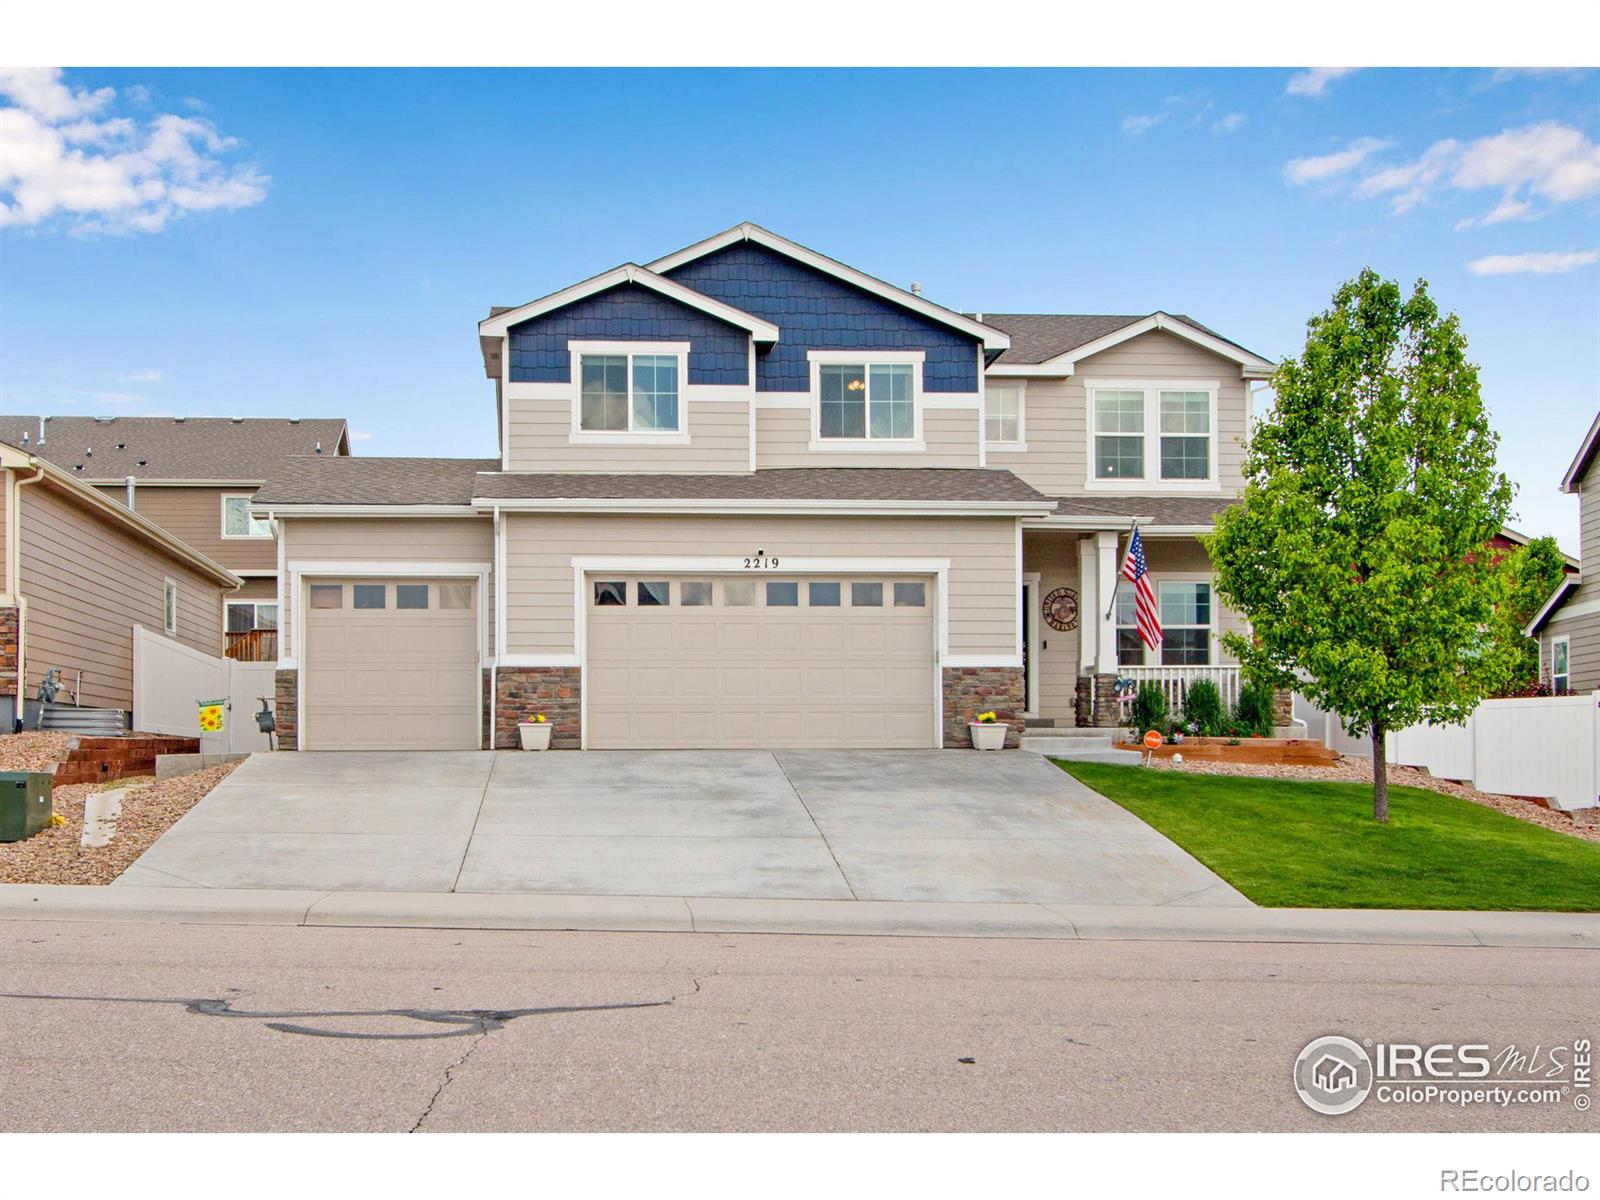 2219  74th Avenue, greeley MLS: 4567891003897 Beds: 5 Baths: 4 Price: $545,000